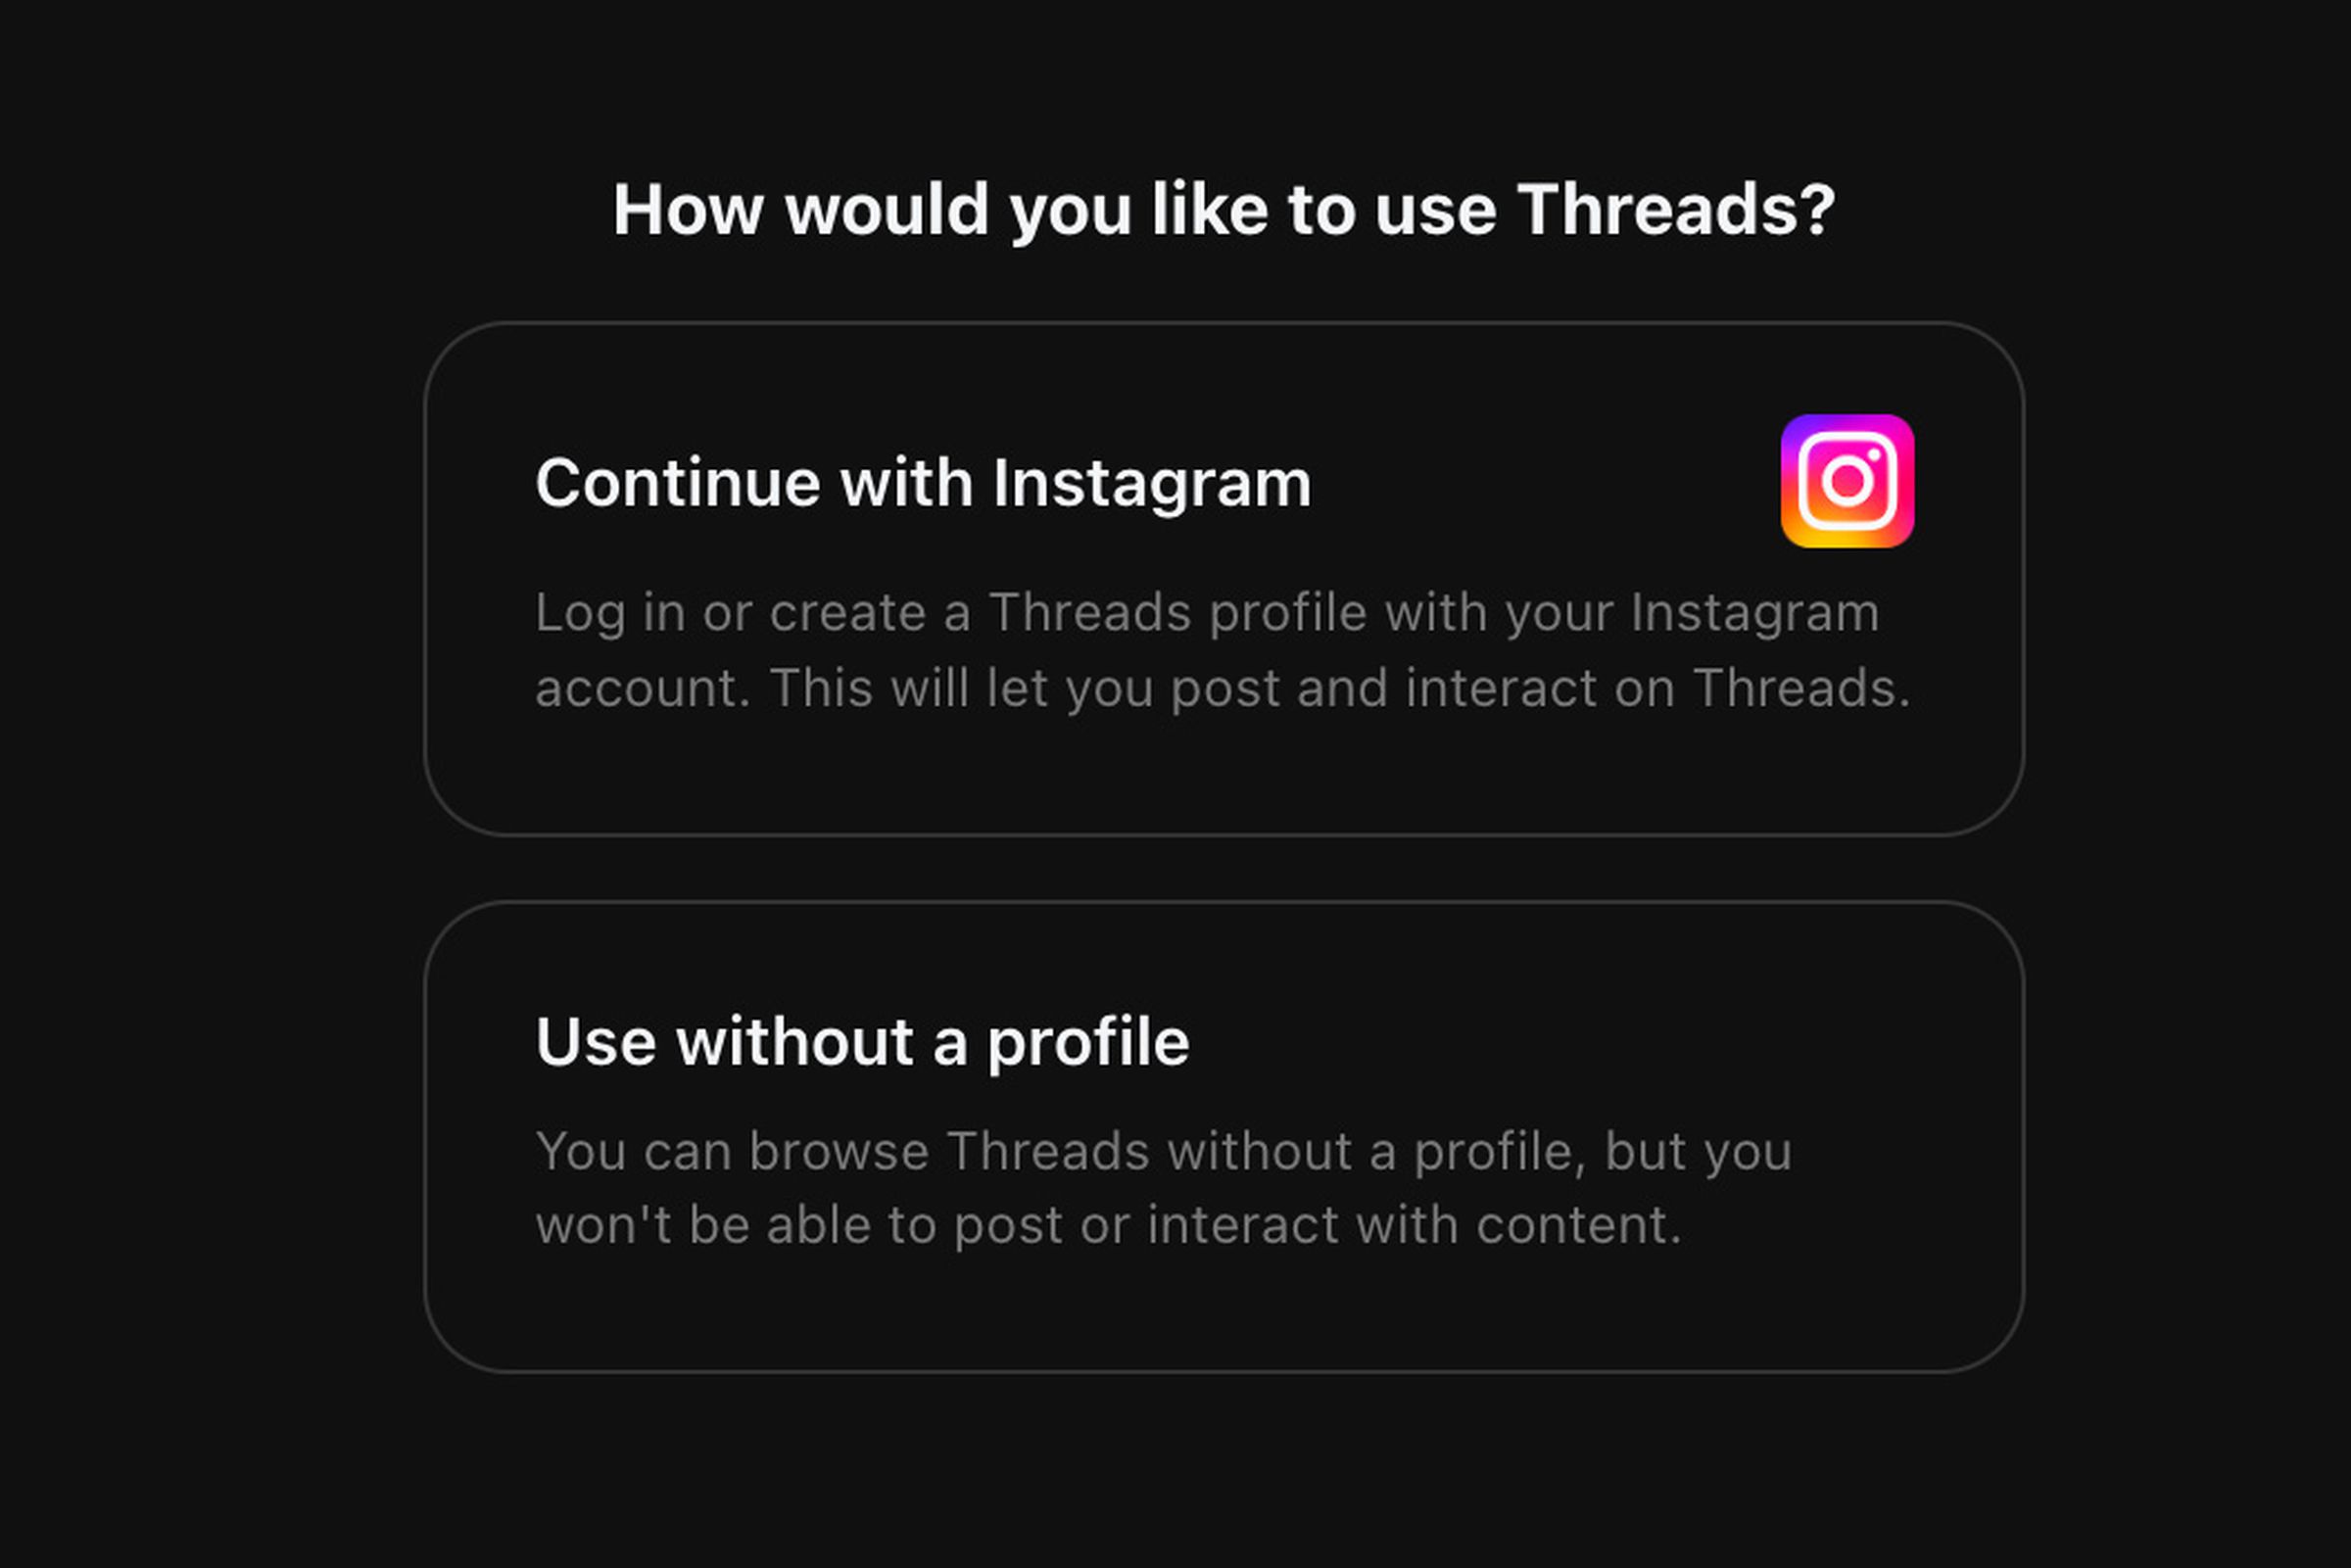 Two buttons, one to “Continue with Instagram” and another to “Use without a profile”